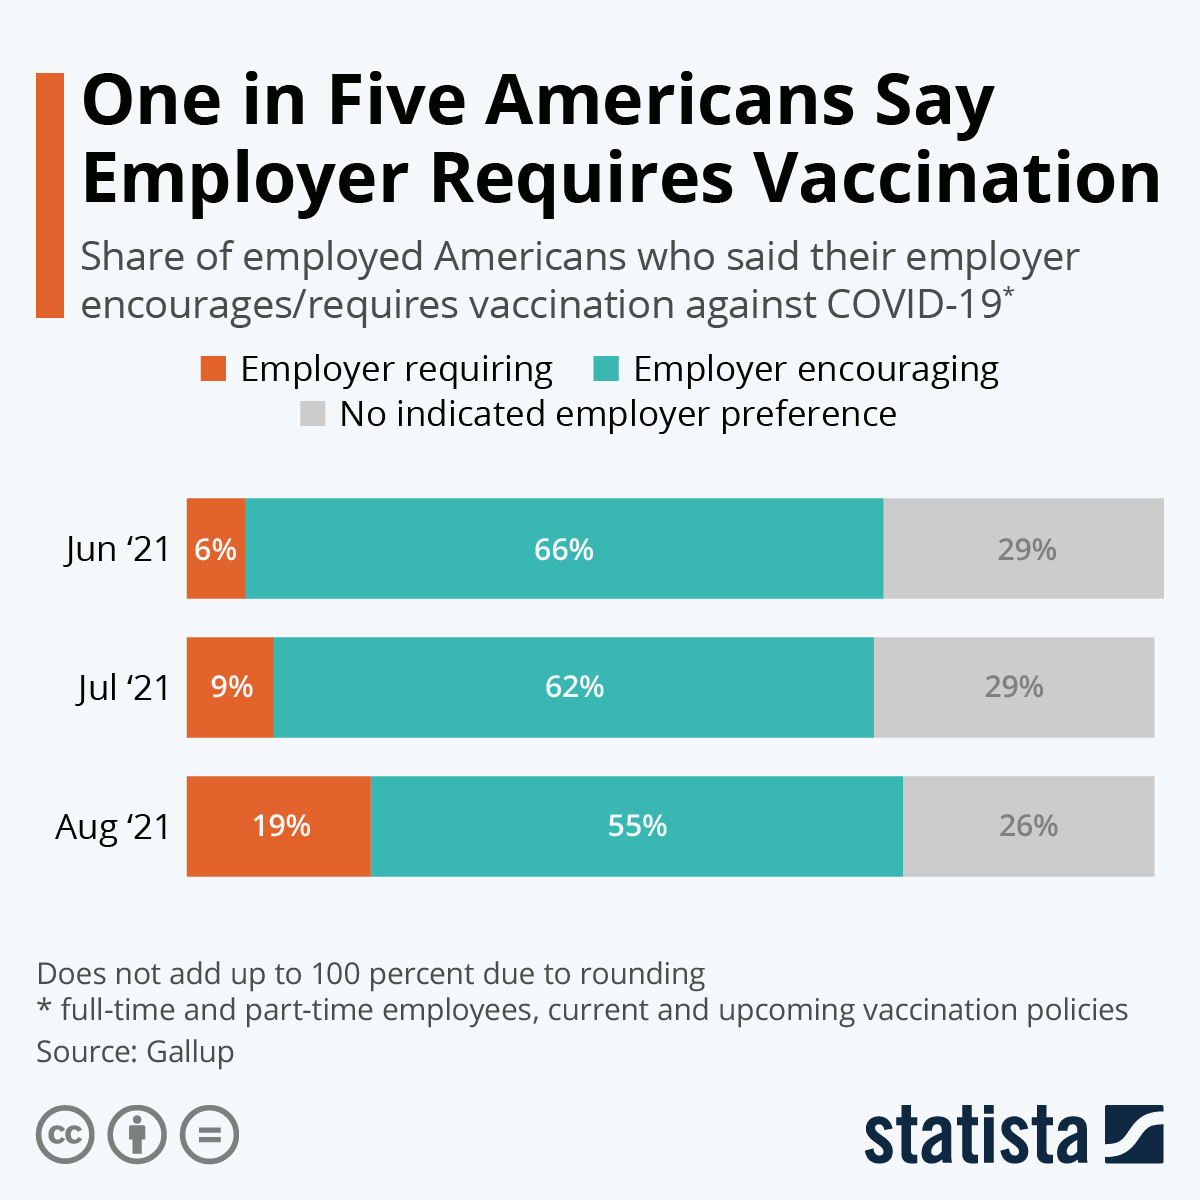 One in Five Americans Say Employer Requires Vaccination